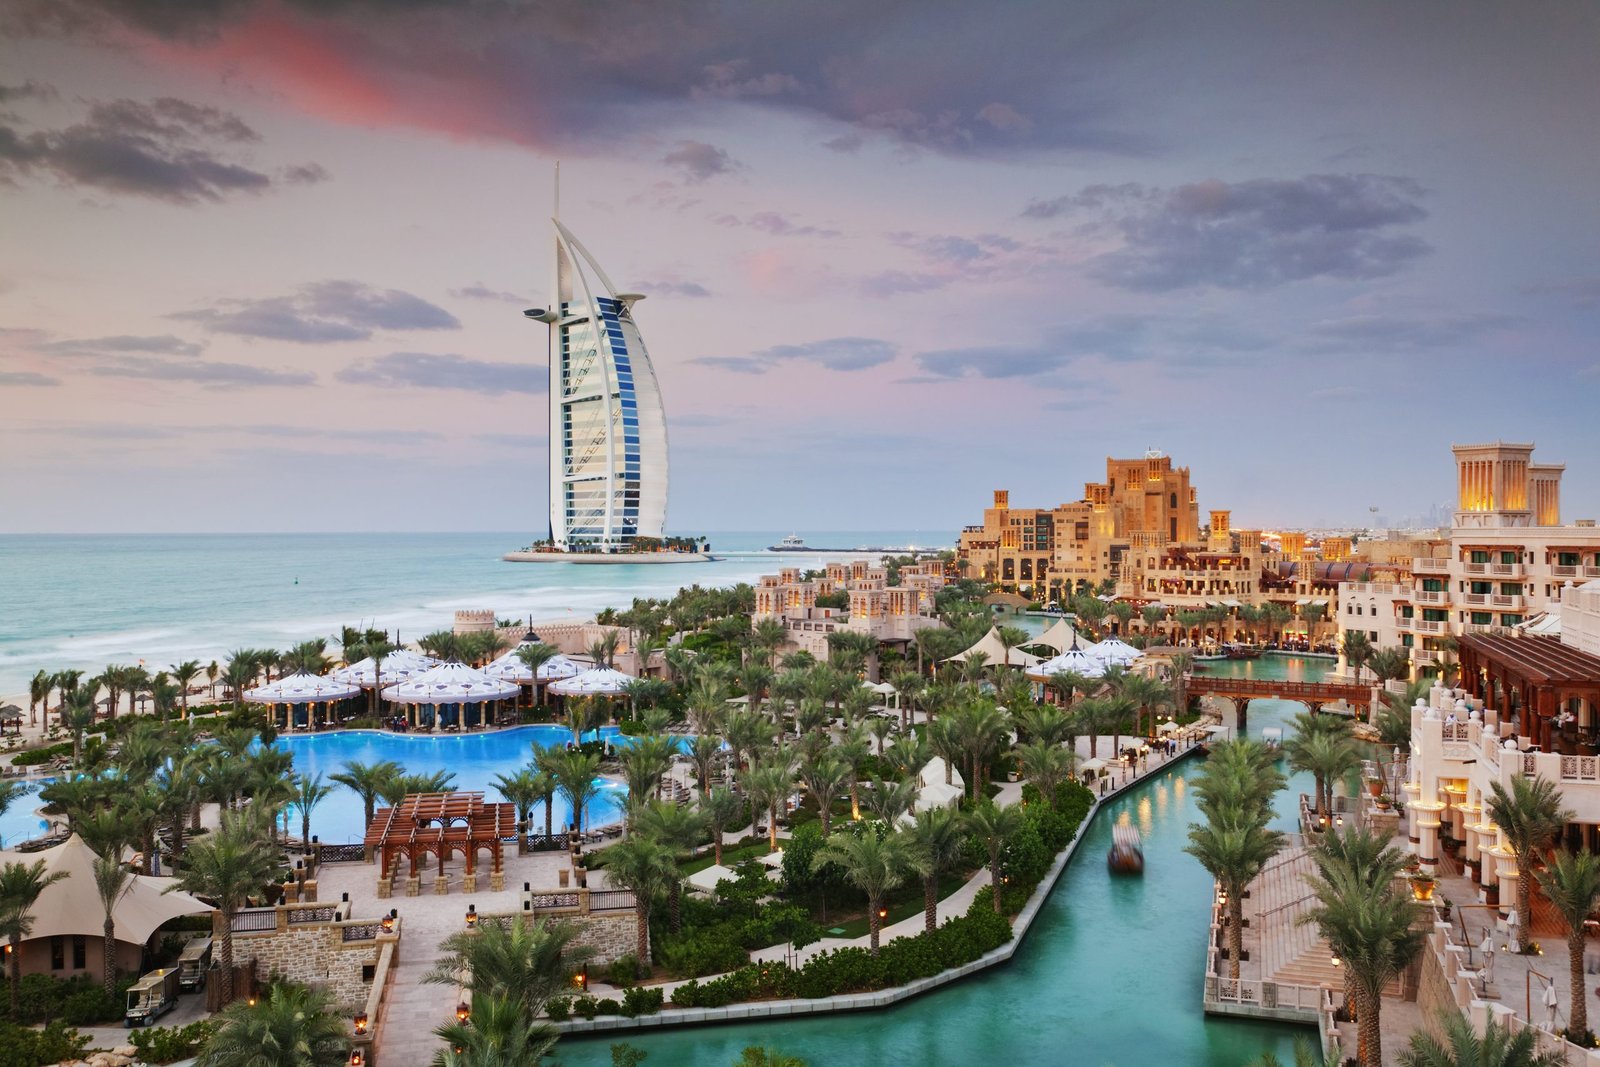 Best Family Hotel and Vacation in Dubai – Unforgettable Experiences for All Ages